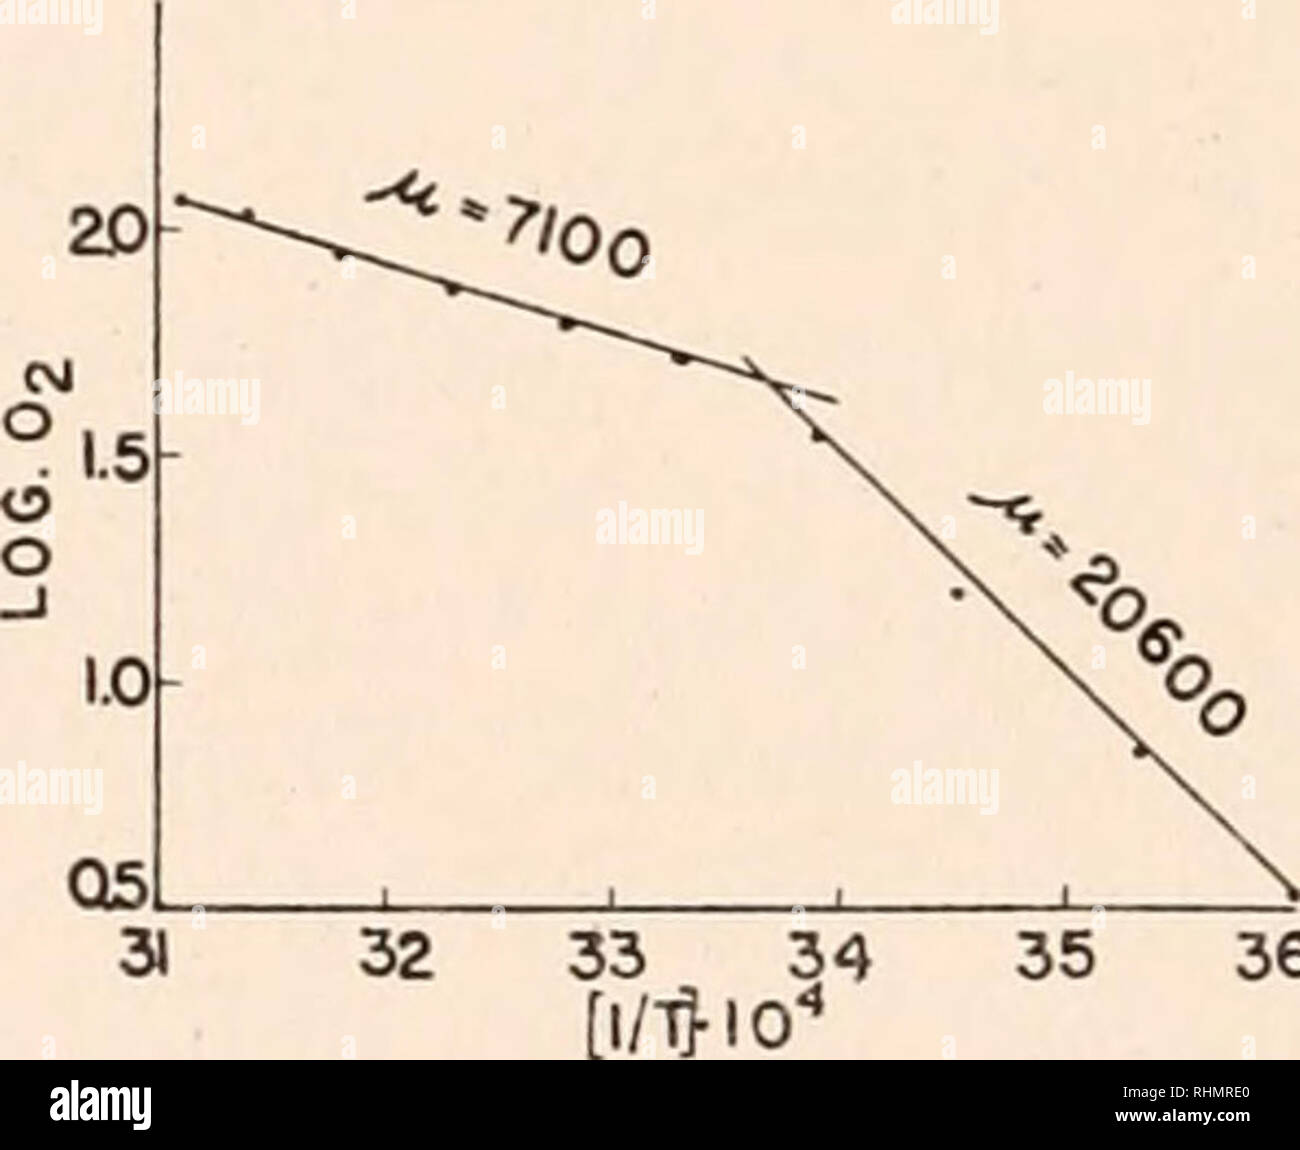 . The Biological bulletin. Biology; Zoology; Biology; Marine Biology. 1.48 0 10 20 30 40 50 °C FIGURE 1. The Qio of the oxygen consumption of a larval Eustrongylides. 32 33 34 35 36. FIGURE 2. The oxygen consumption of a larval Eustrongylides expressed according to Arrhenius' formula. interest to note that 27° C. is one of the critical temperatures where according to Crozier (1926) a break in the curves is frequently found. The n values too are well within the range of those frequently found in biological processes (Crozier, 1926a). These findings might be interpreted with Crozier (1925) on th Stock Photo